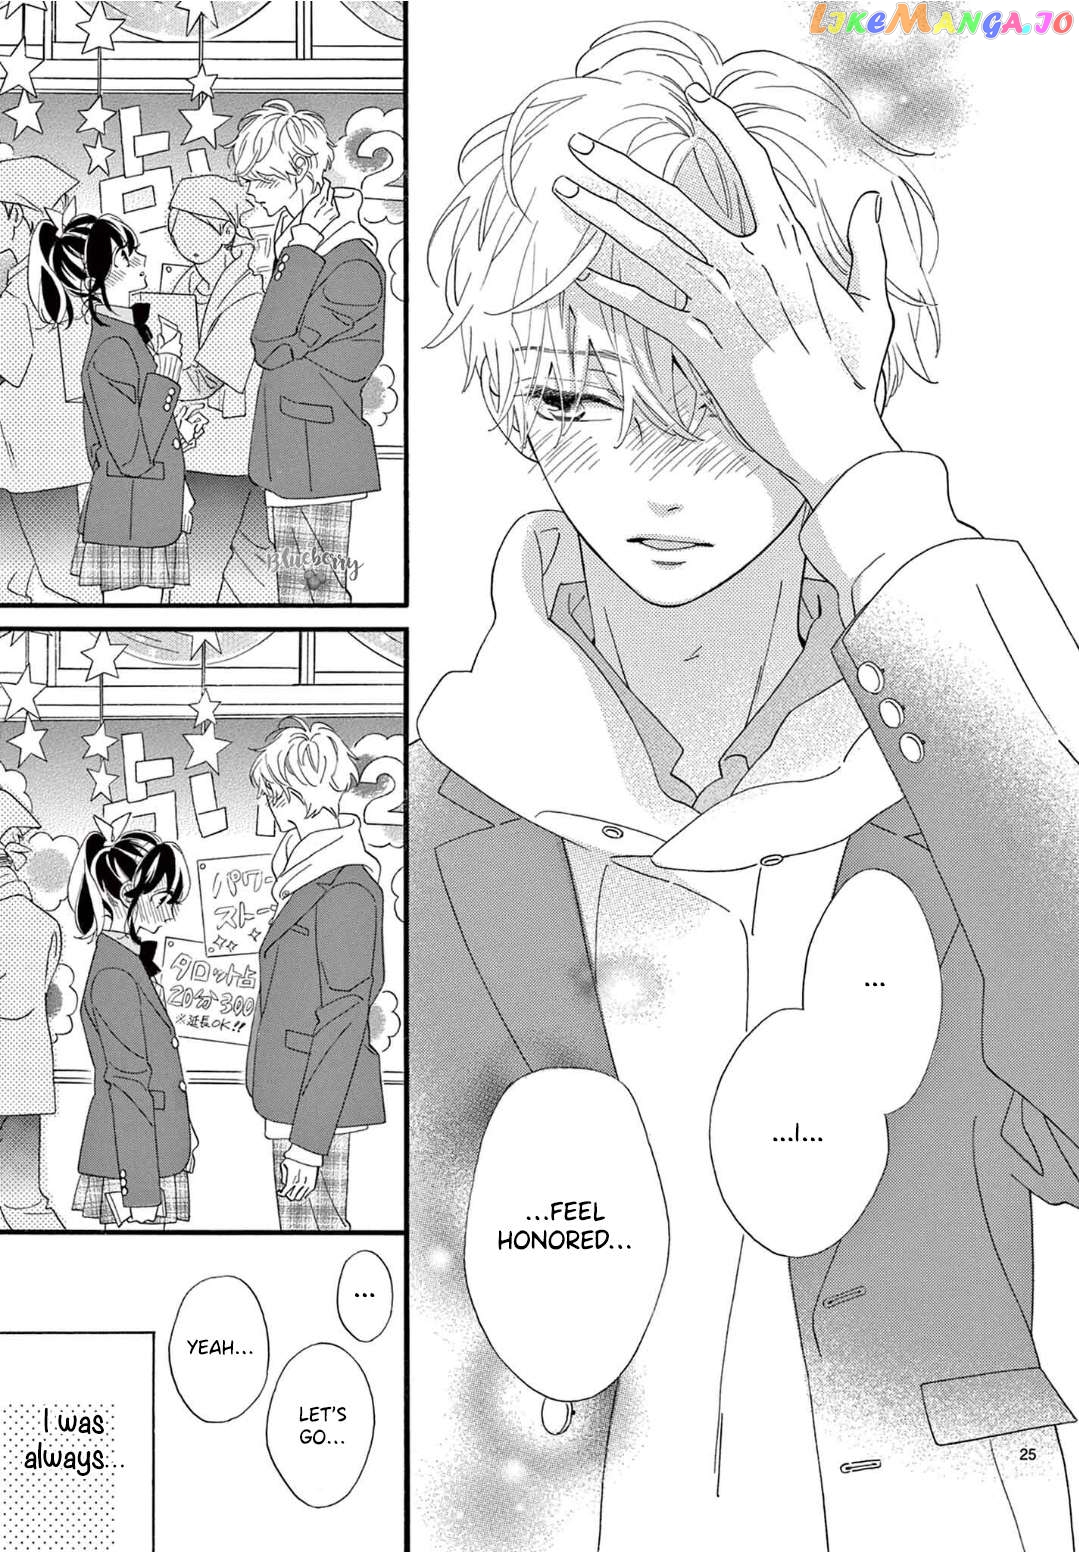 AM8:02, hatsukoi Chapter 10 - page 27